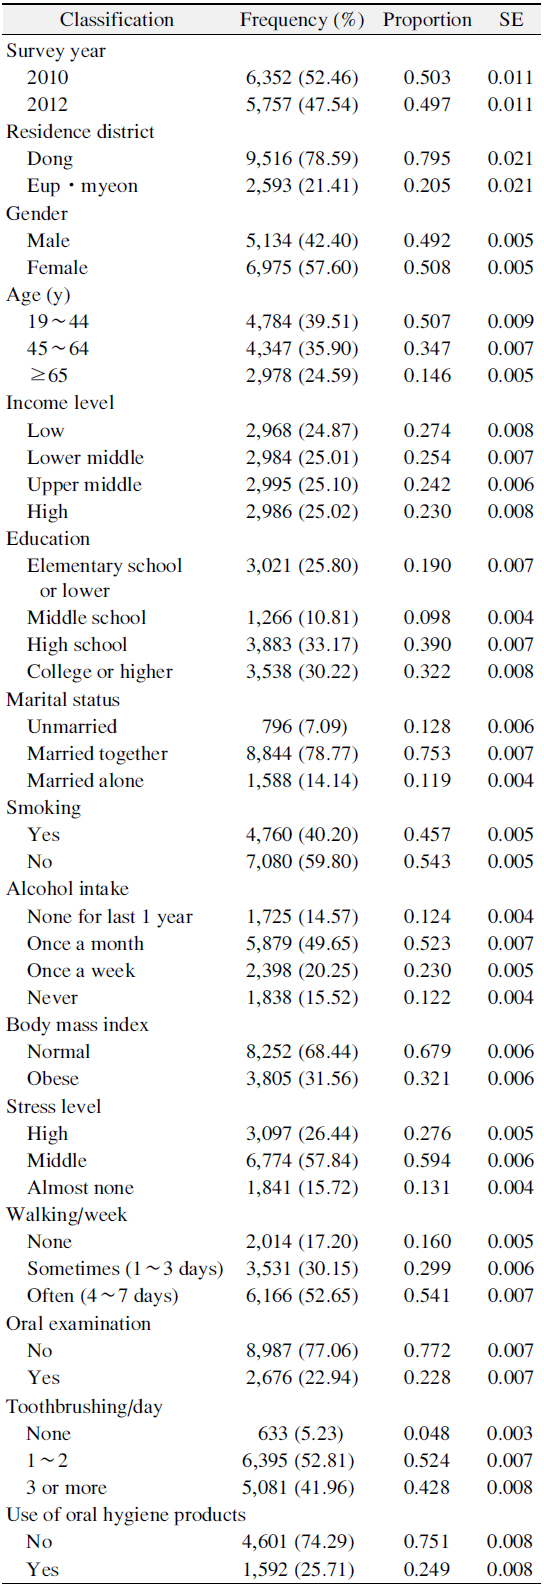 The Demographics and Socioeconomic Status of Subjects (n=11,488, Weighted n=73,105,386)